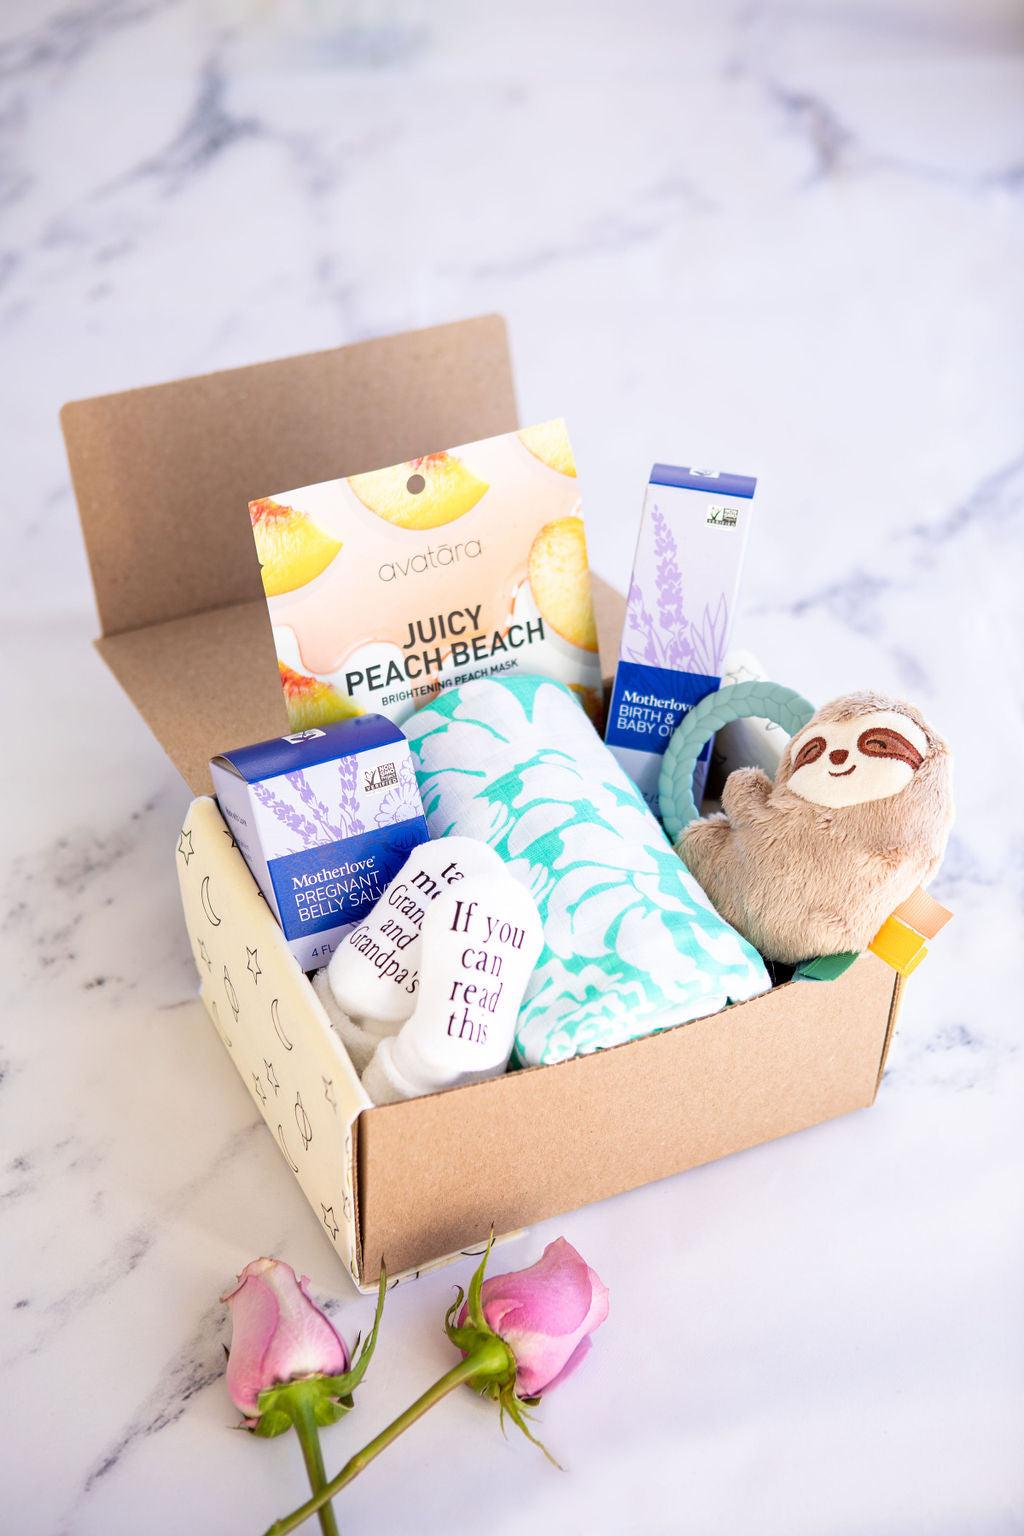 New Mom, Baby Gift Box for Women After Birth, Baby Gift Basket